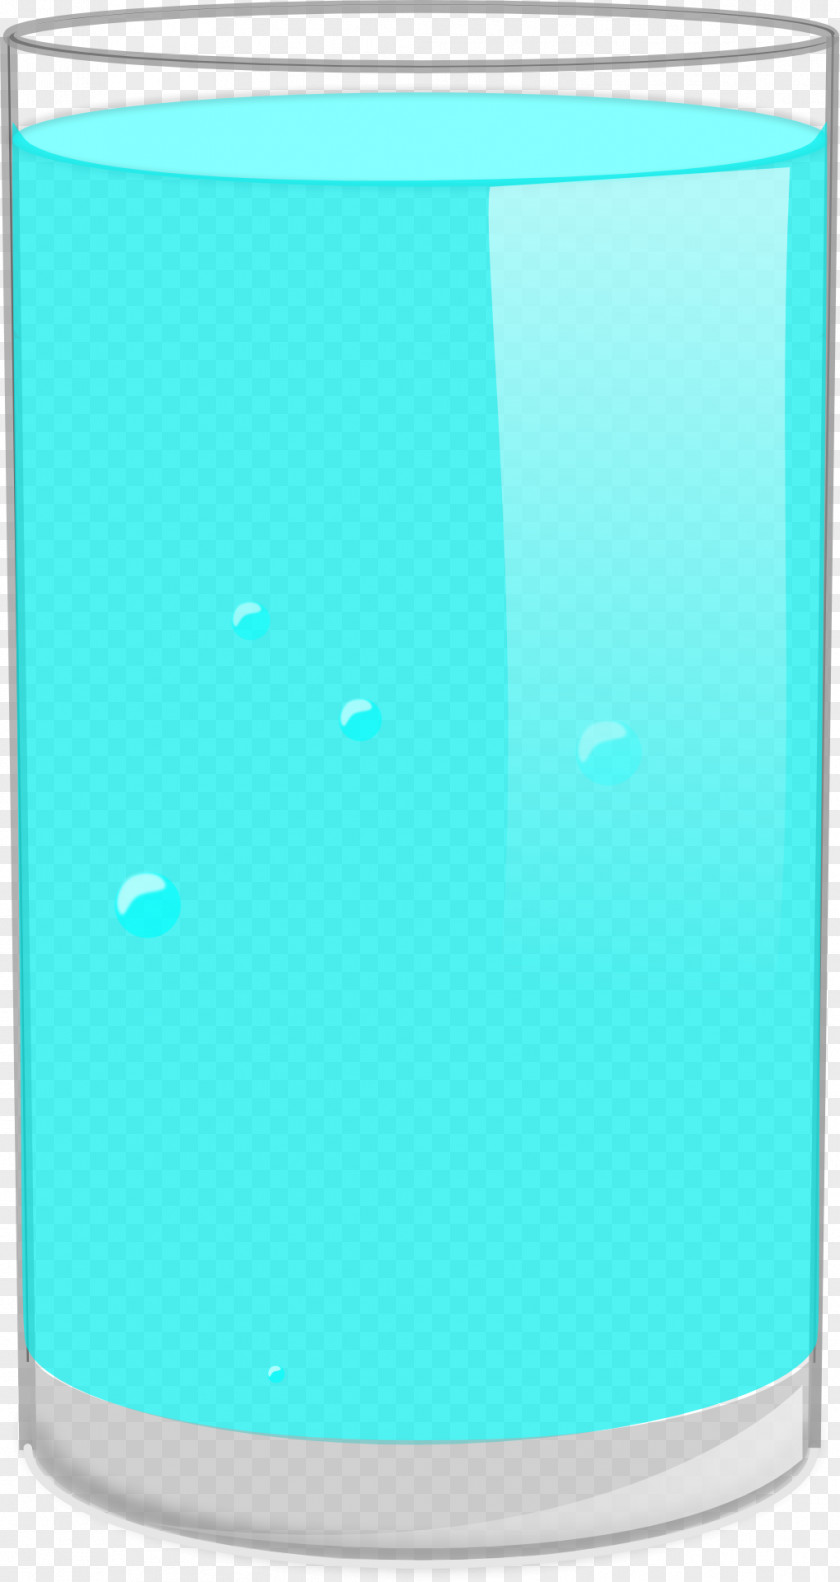 Full Glass Of Water Cup Clip Art PNG